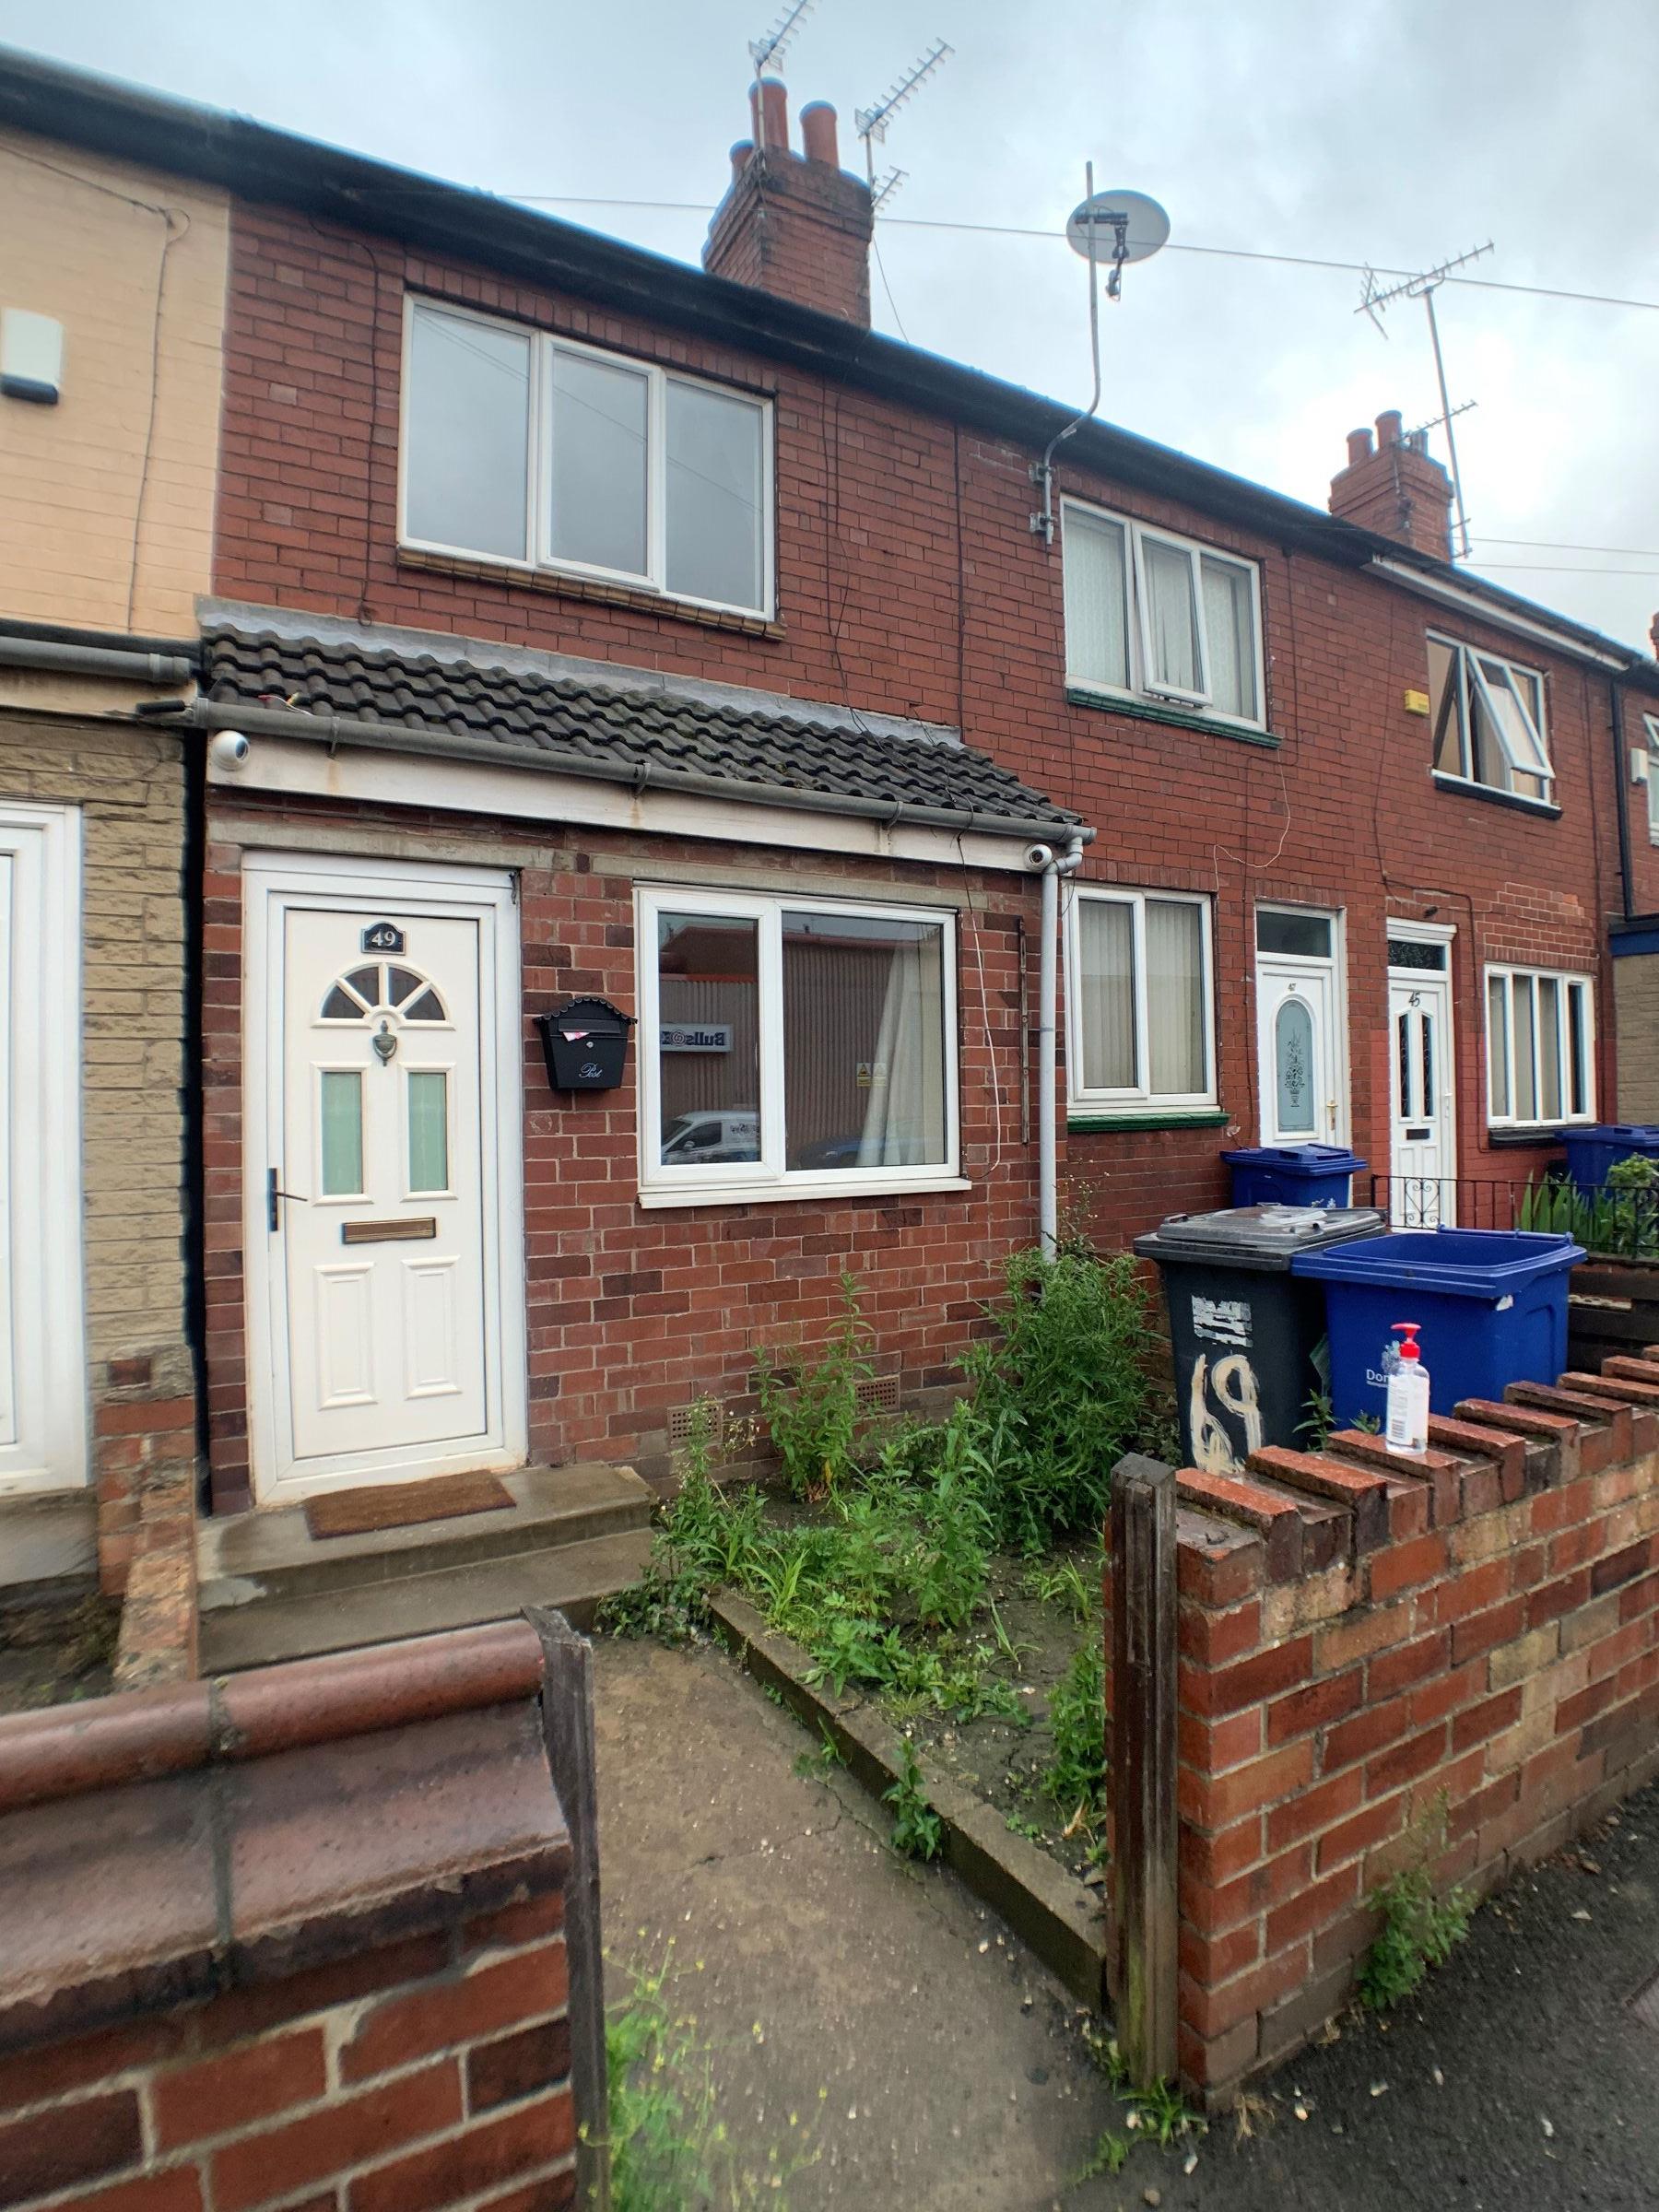 2 bed Mid Terraced House for rent in Doncaster. From 247 Property Services Ltd